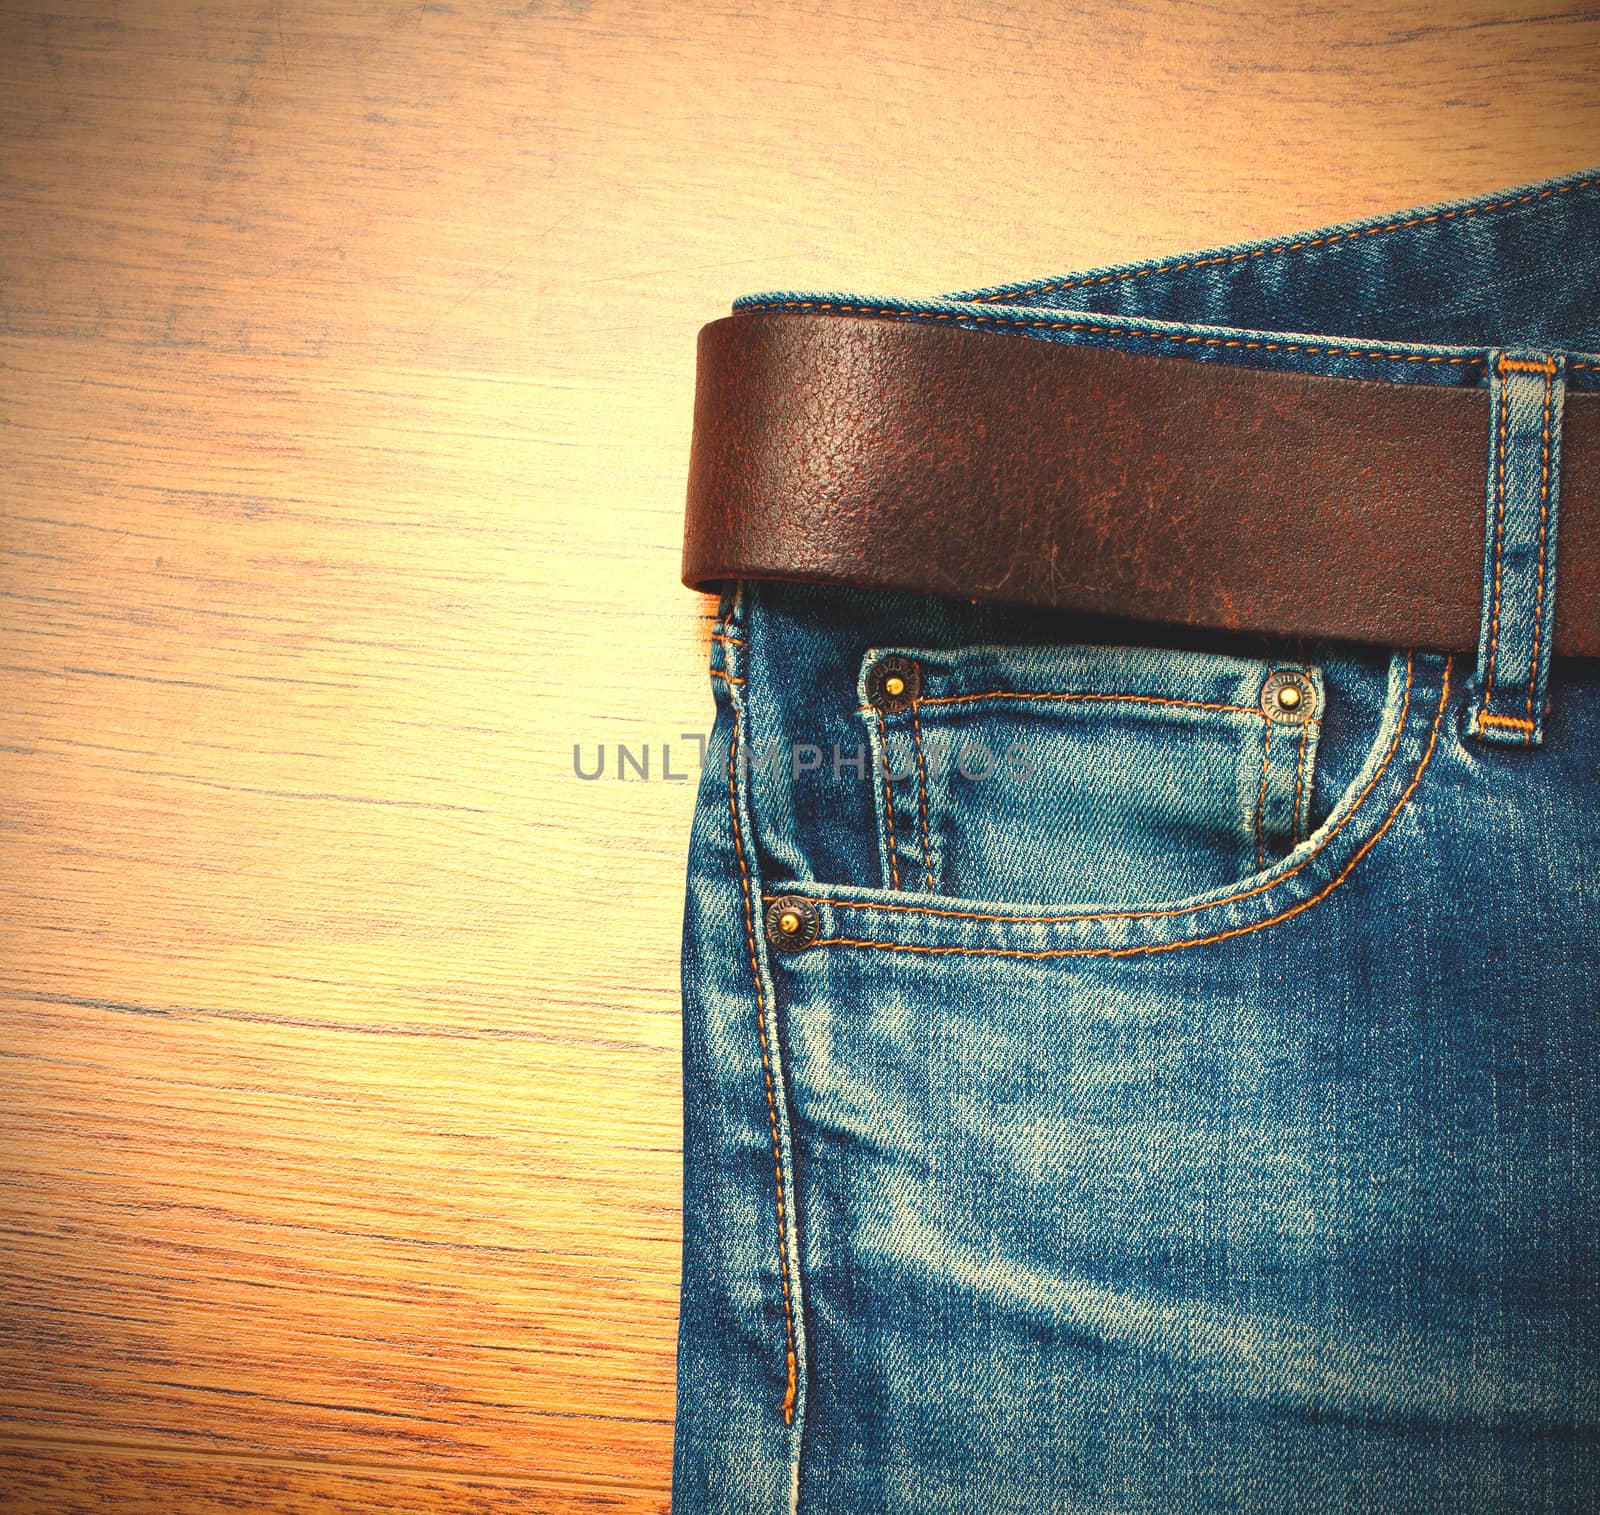 Aged jeans with a leather belt on wooden boards. copy space. Instagram image style